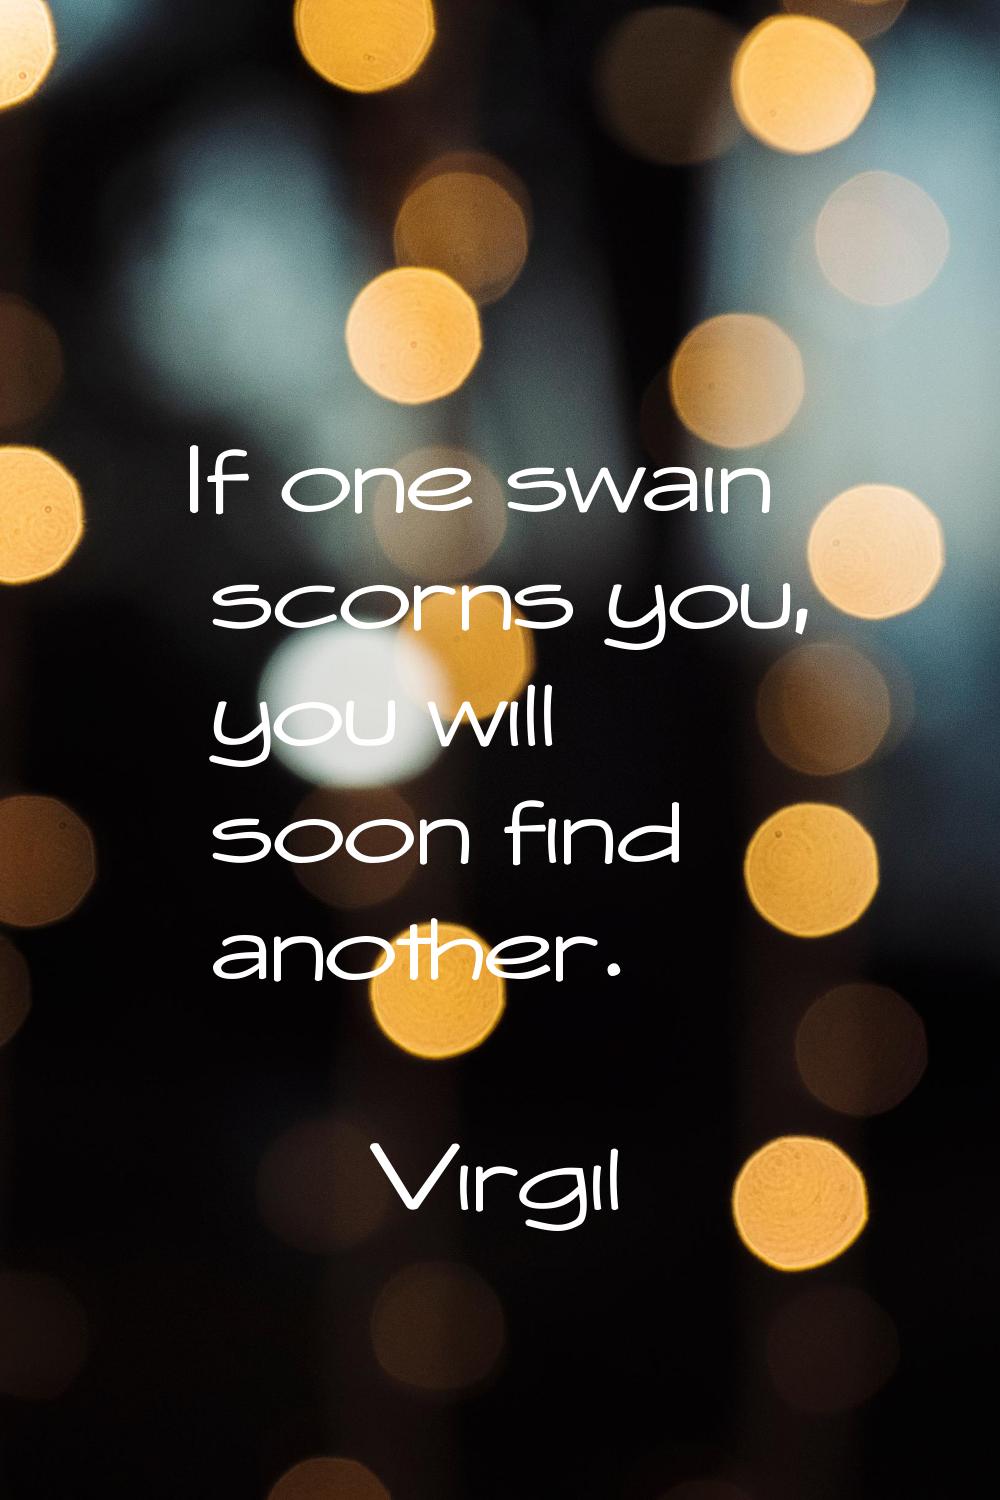 If one swain scorns you, you will soon find another.